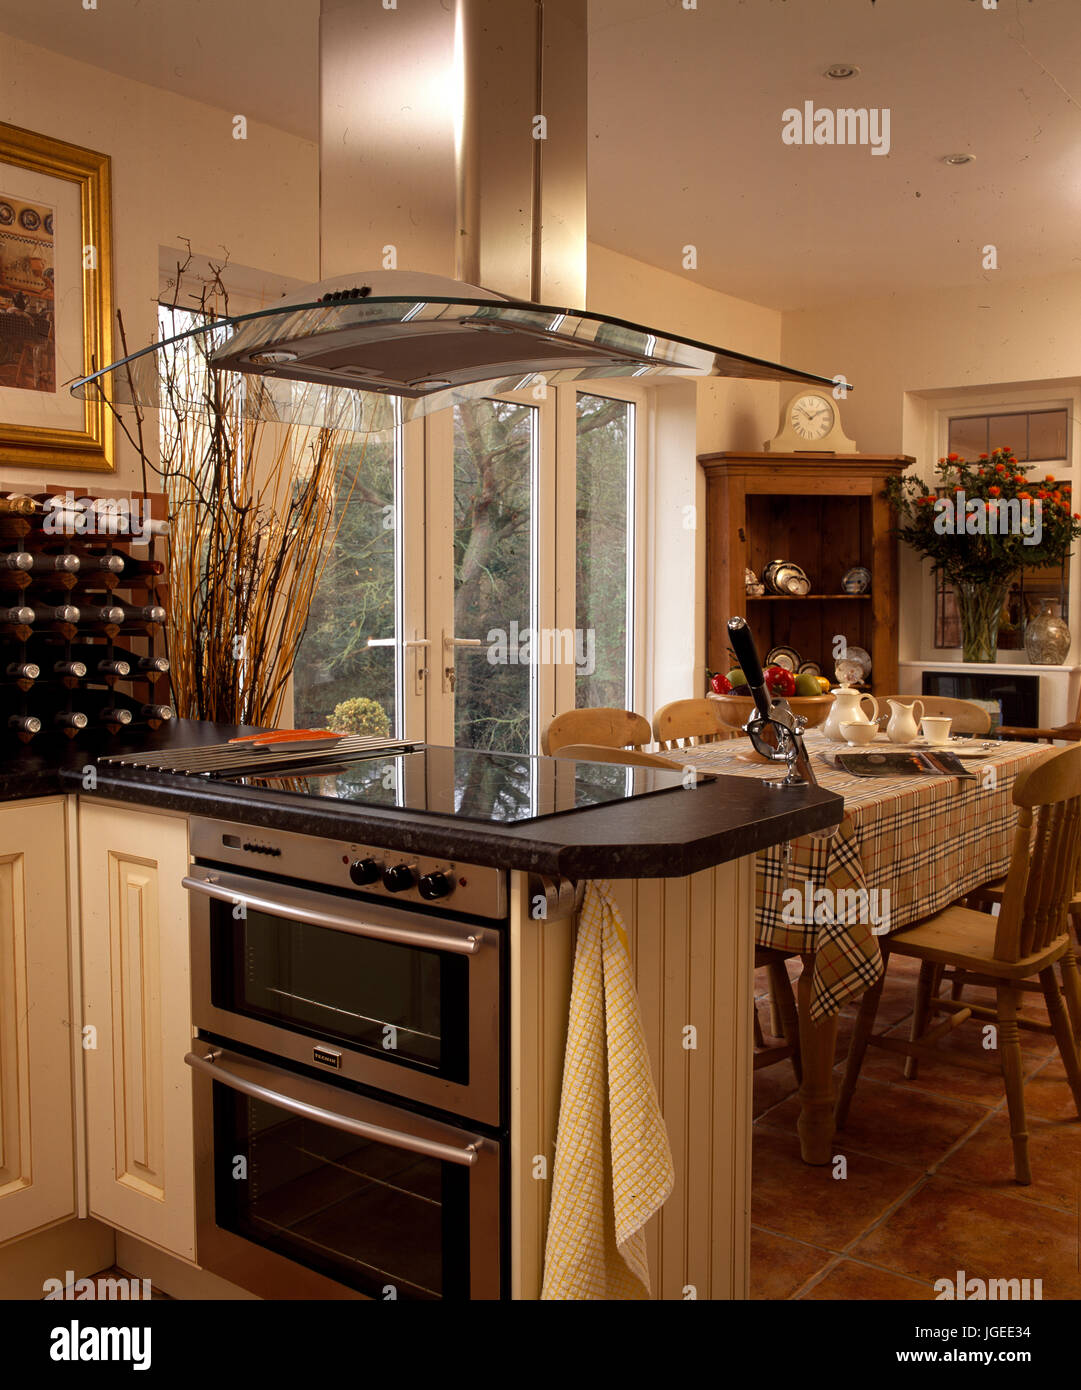 Hob and ovens in peninsular unit used as divider in this kitchen Stock Photo